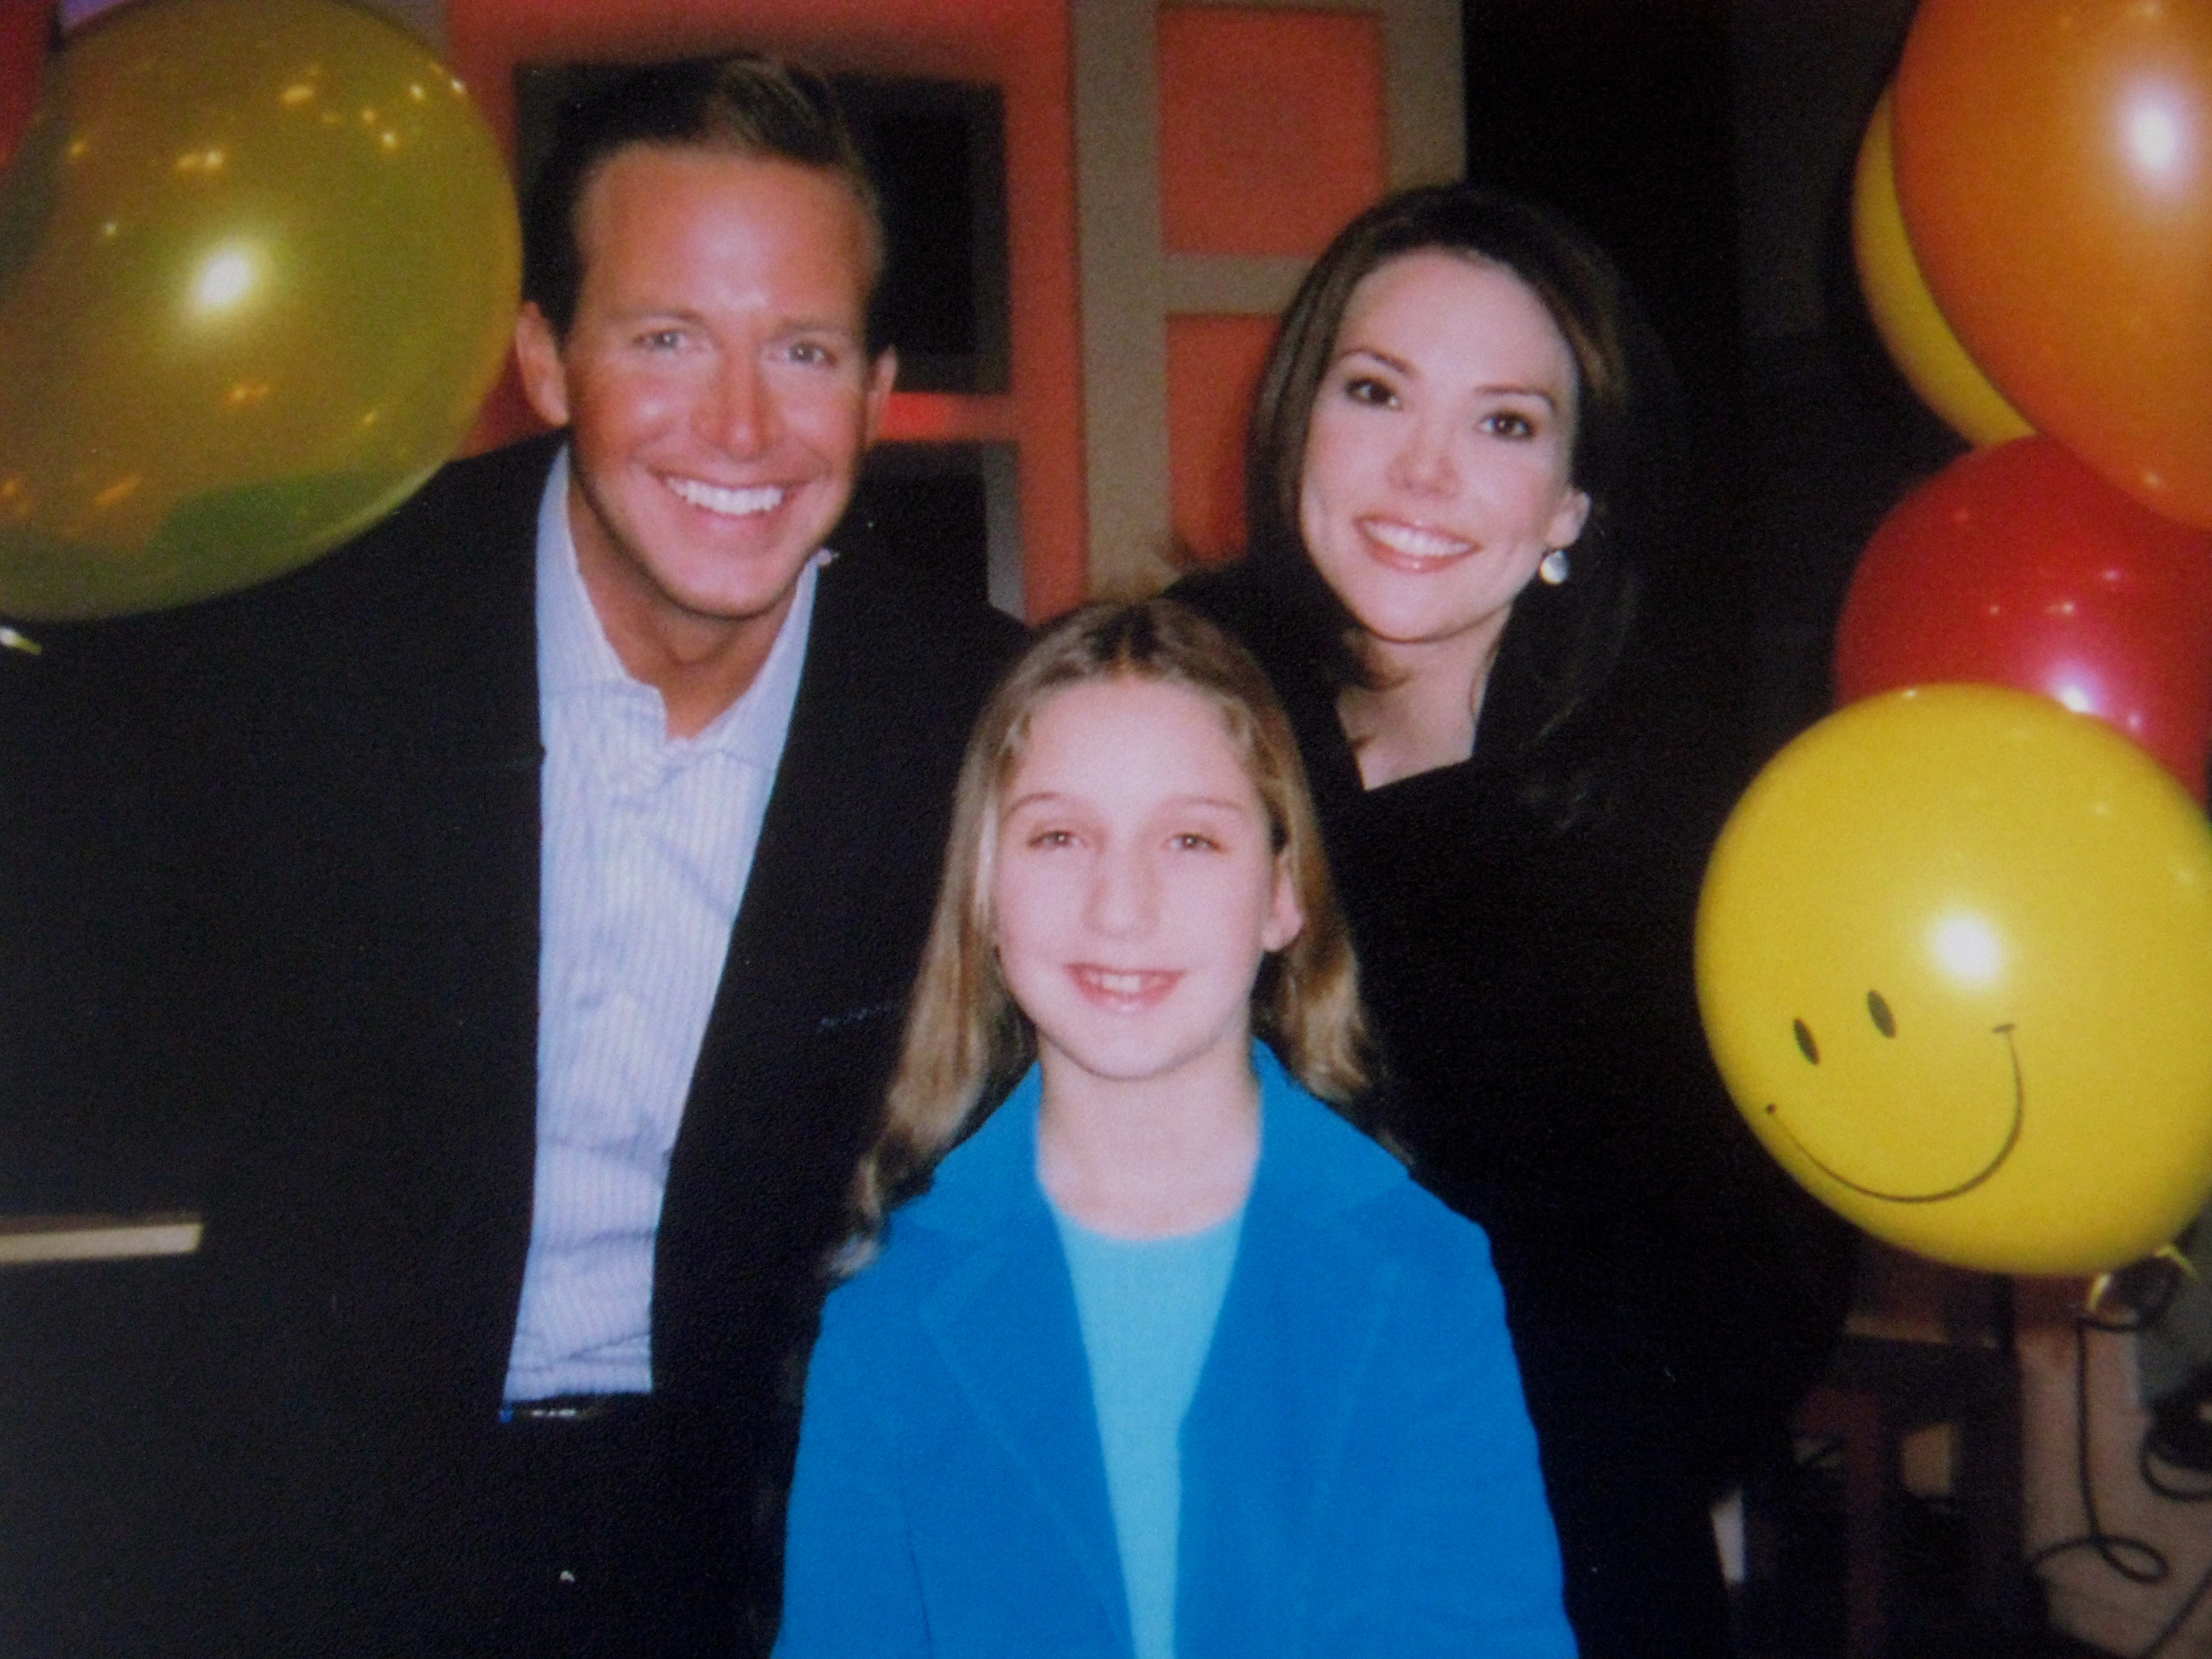 Carina with the Co-Hosts of the CBS Early Show, for Neil Sedaka's CD release.